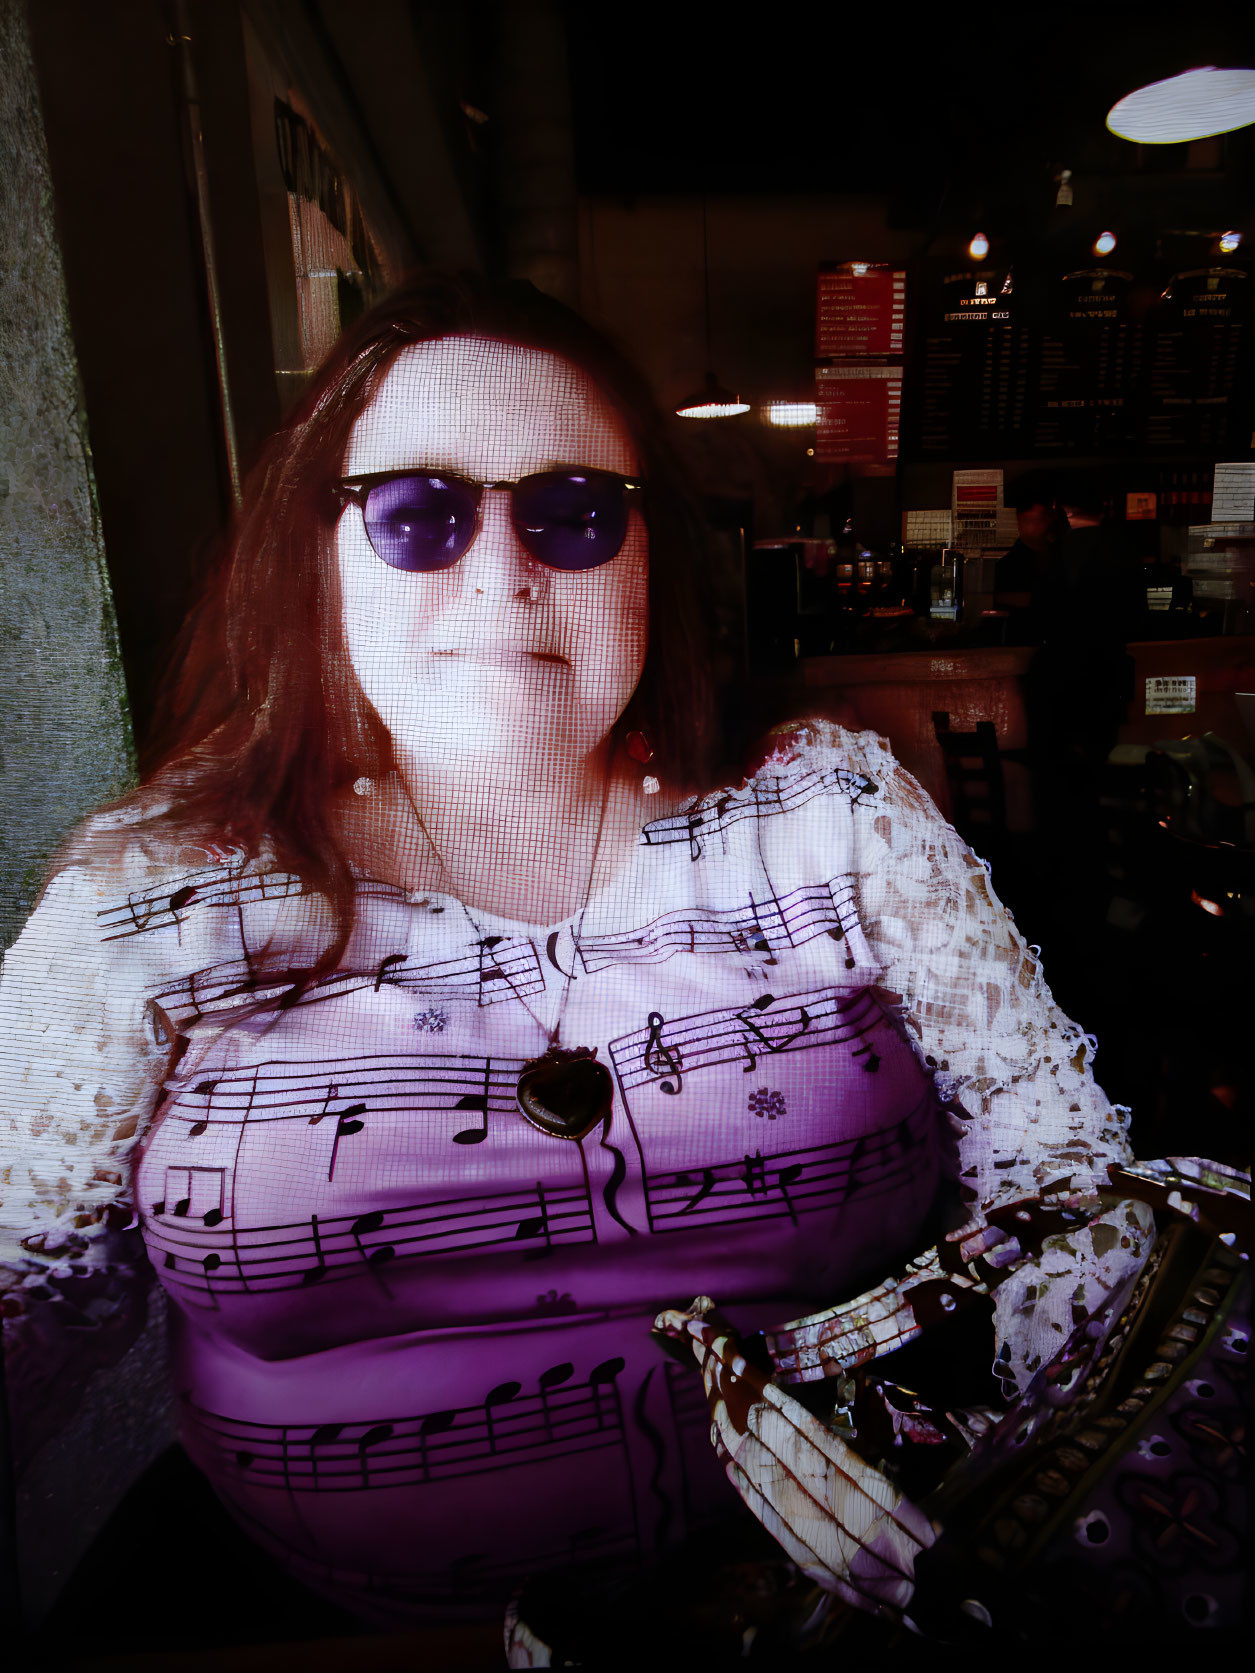 Woman in sunglasses with purple top at cafe table.